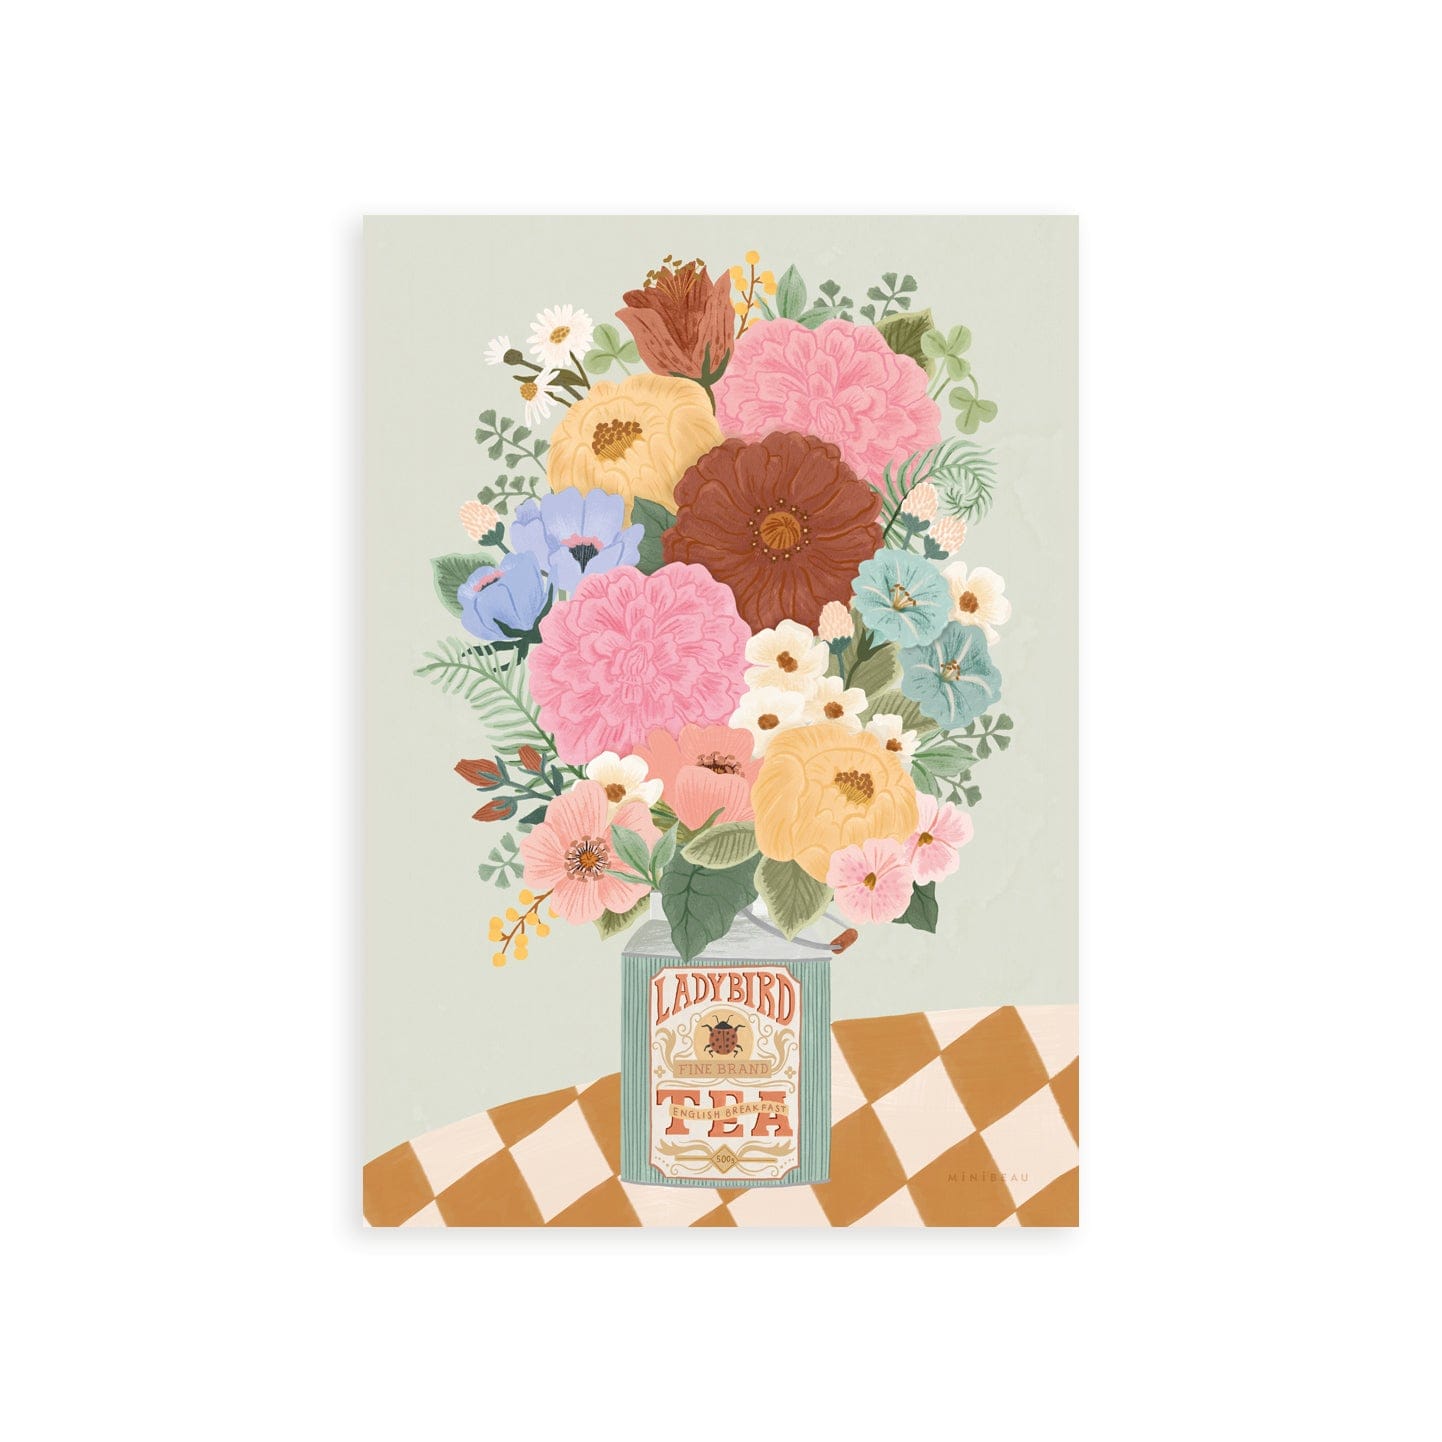 Our boho floral art print consists of a bunch of flowers and foliage in a vintage square ladybird tea bottle on a table with a checked tablecloth on a light green background. The flowers are of varying types and come in shades of red, pink, purple, blue, yellow and cream.